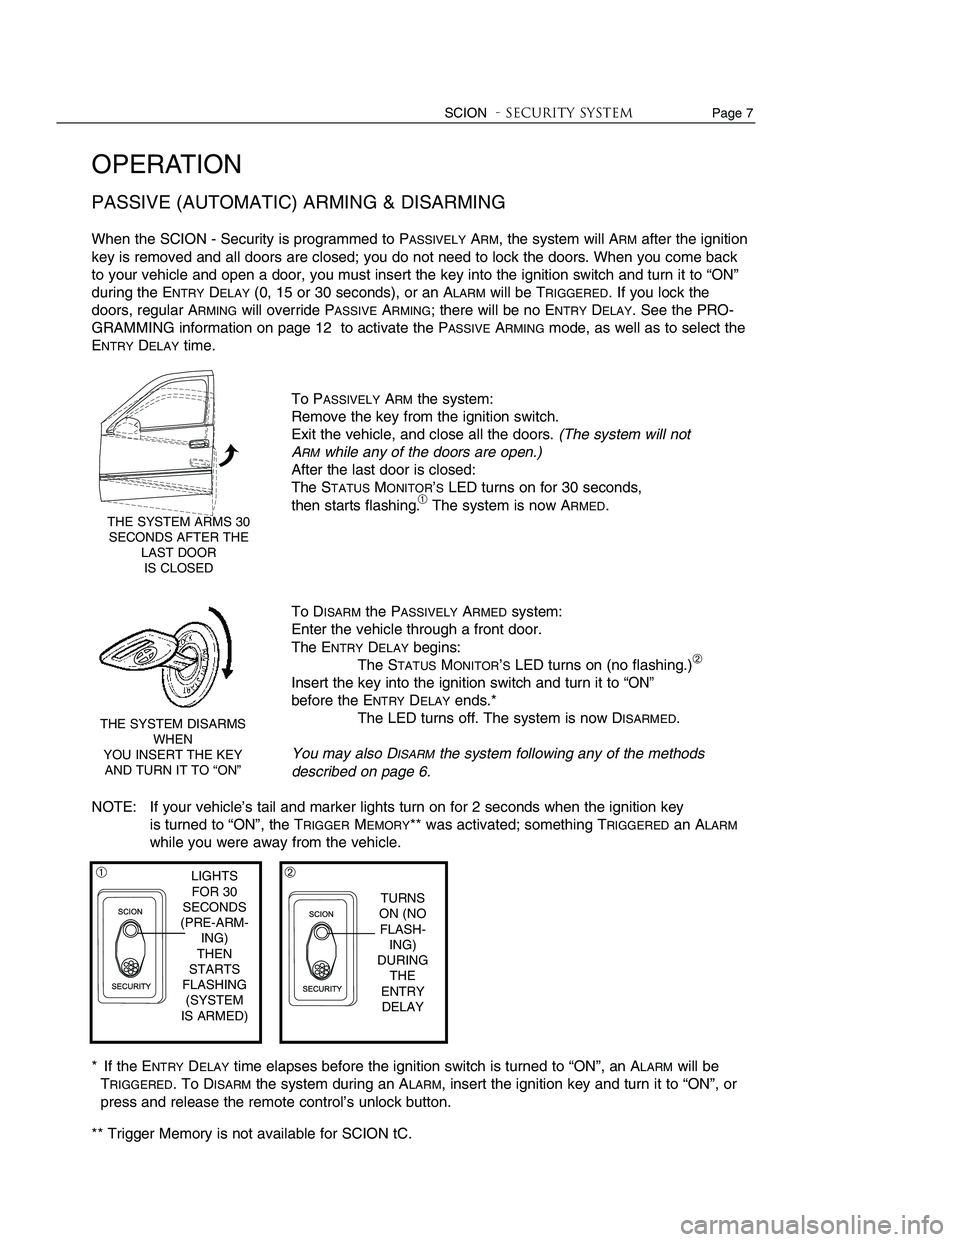 TOYOTA tC 2005  Accessories, Audio & Navigation (in English) 
Page 6                    SCION- Security system
OPERATION
DISARMING THE SECURITY (except PASSIVE DISARMING)
The system may be DISARMEDin several ways. Do one of the following: 
Unlock the doors with